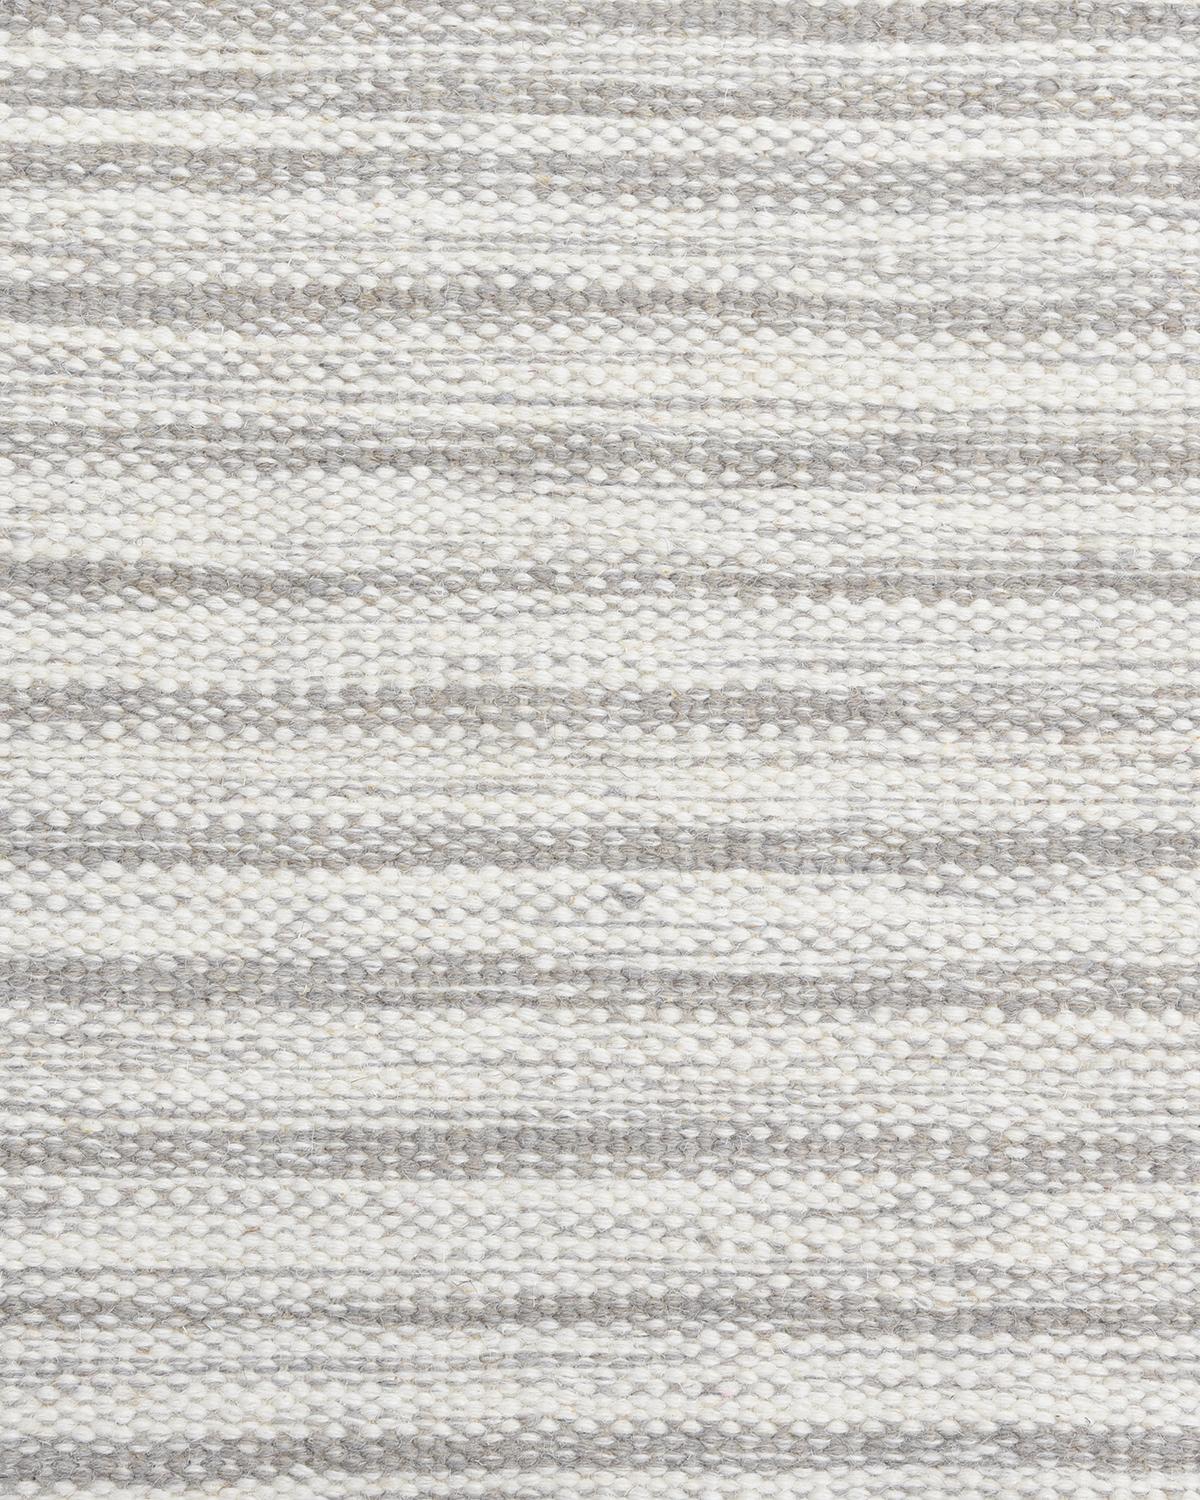 Indian Solo Rugs Flatweave Striped Hand Woven Light Gray Area Rug For Sale